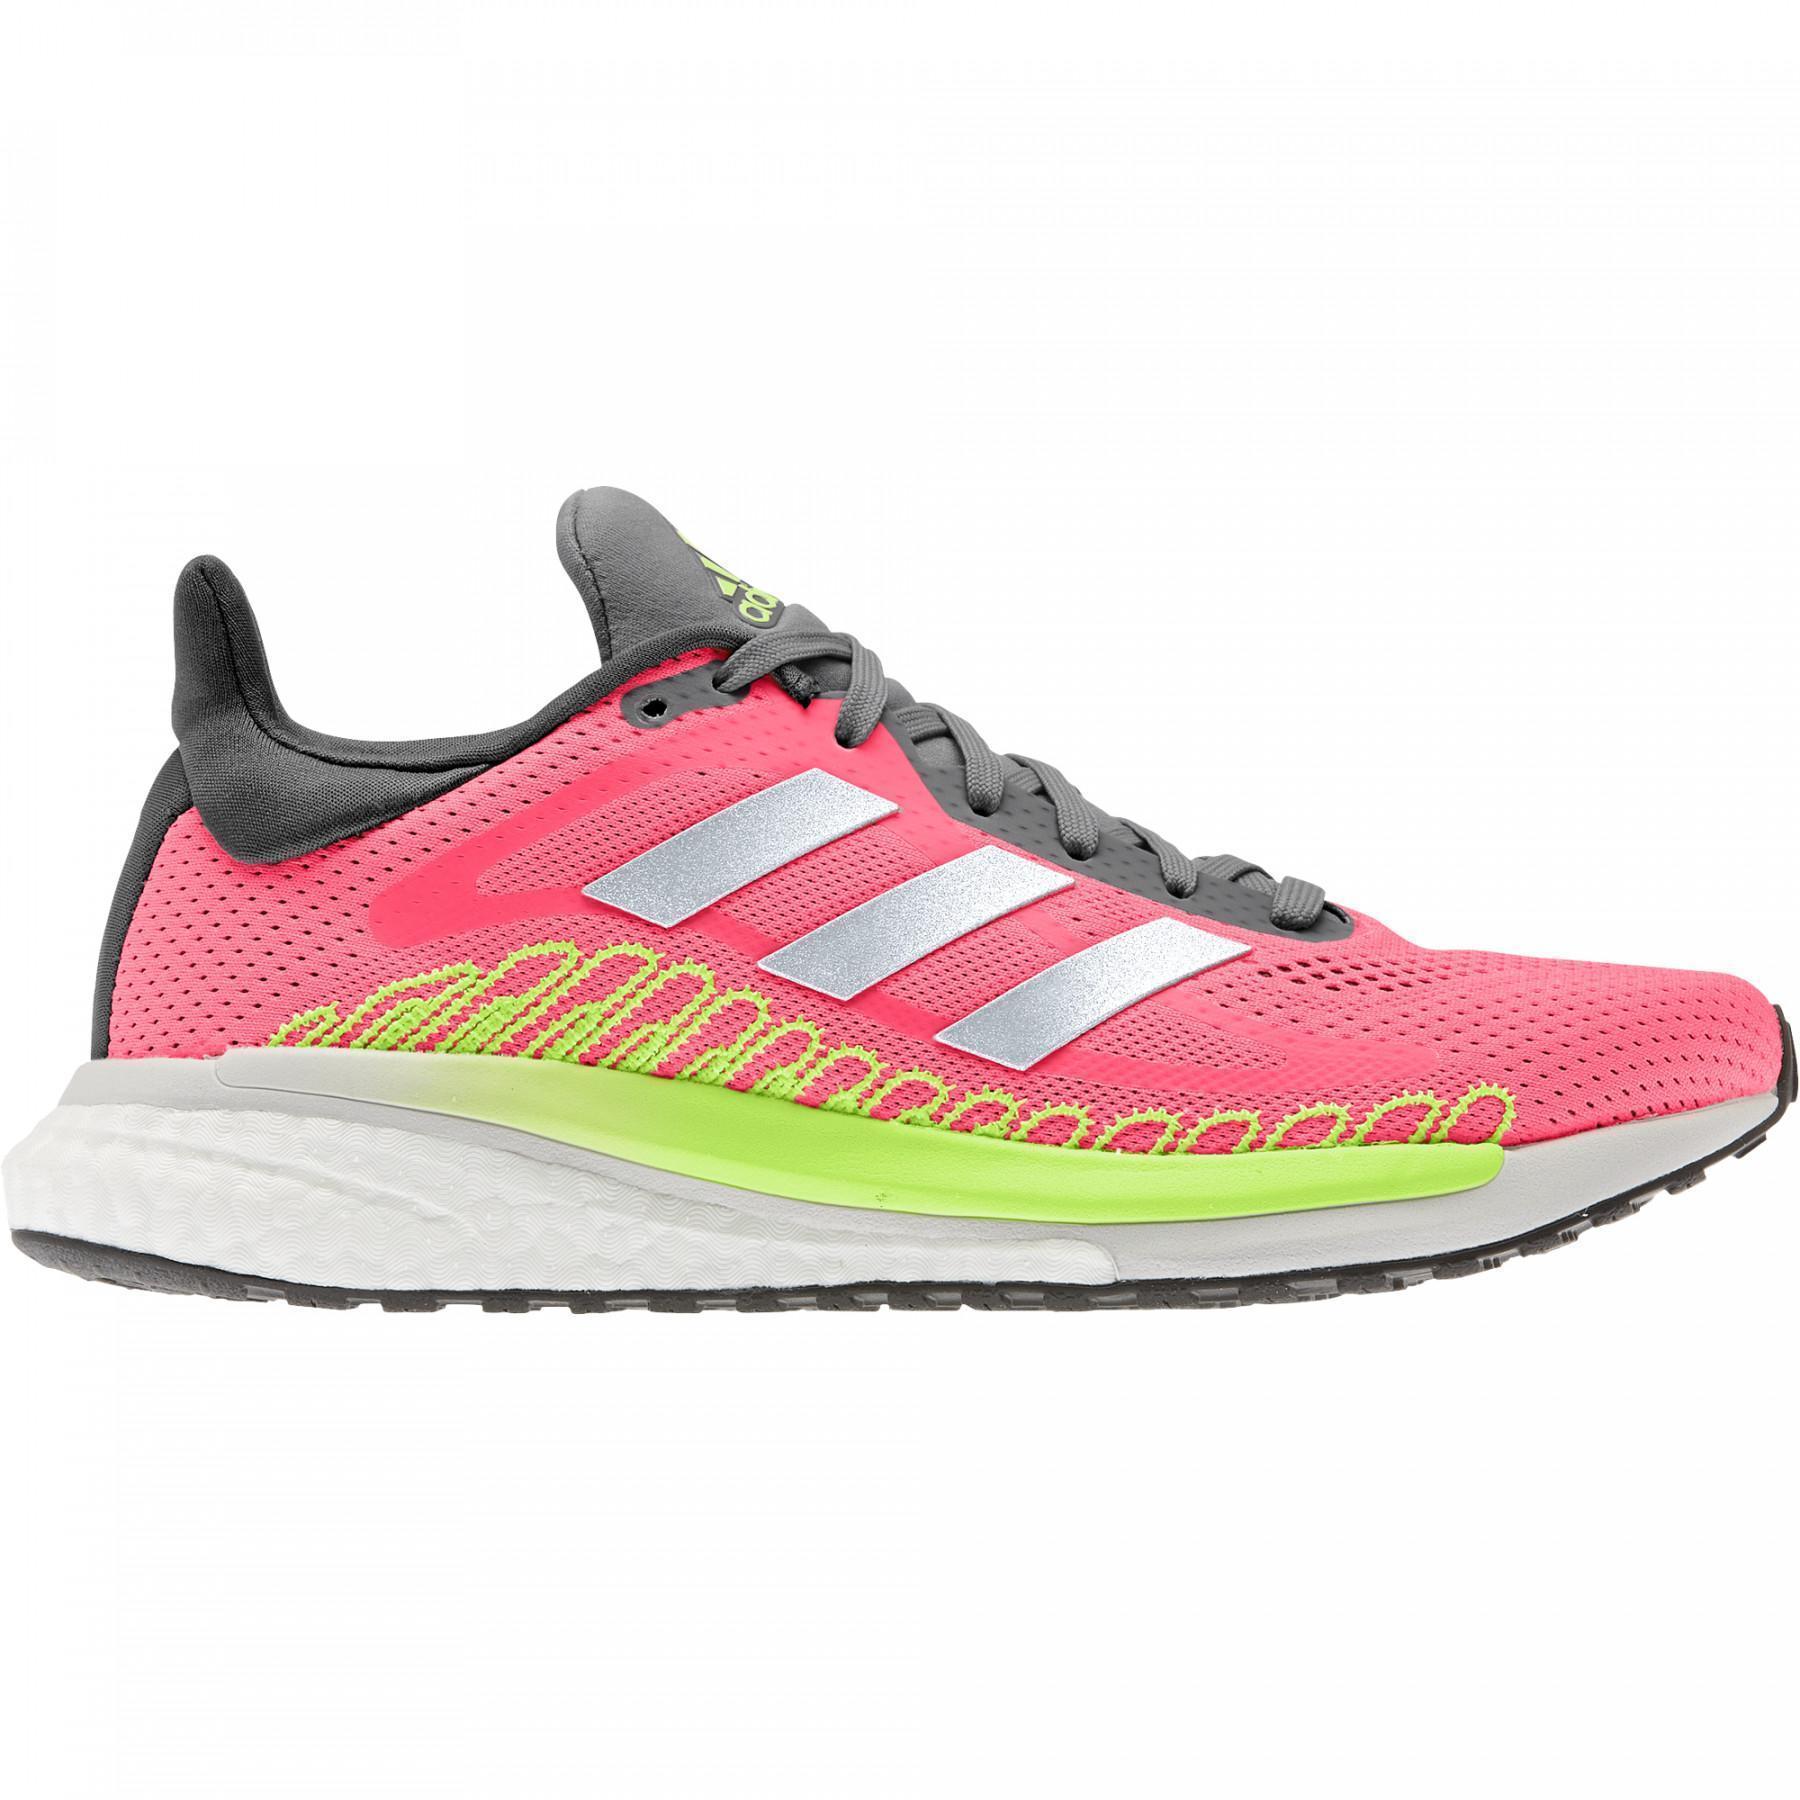 Women's running shoes adidas SolarGlide 3 ST